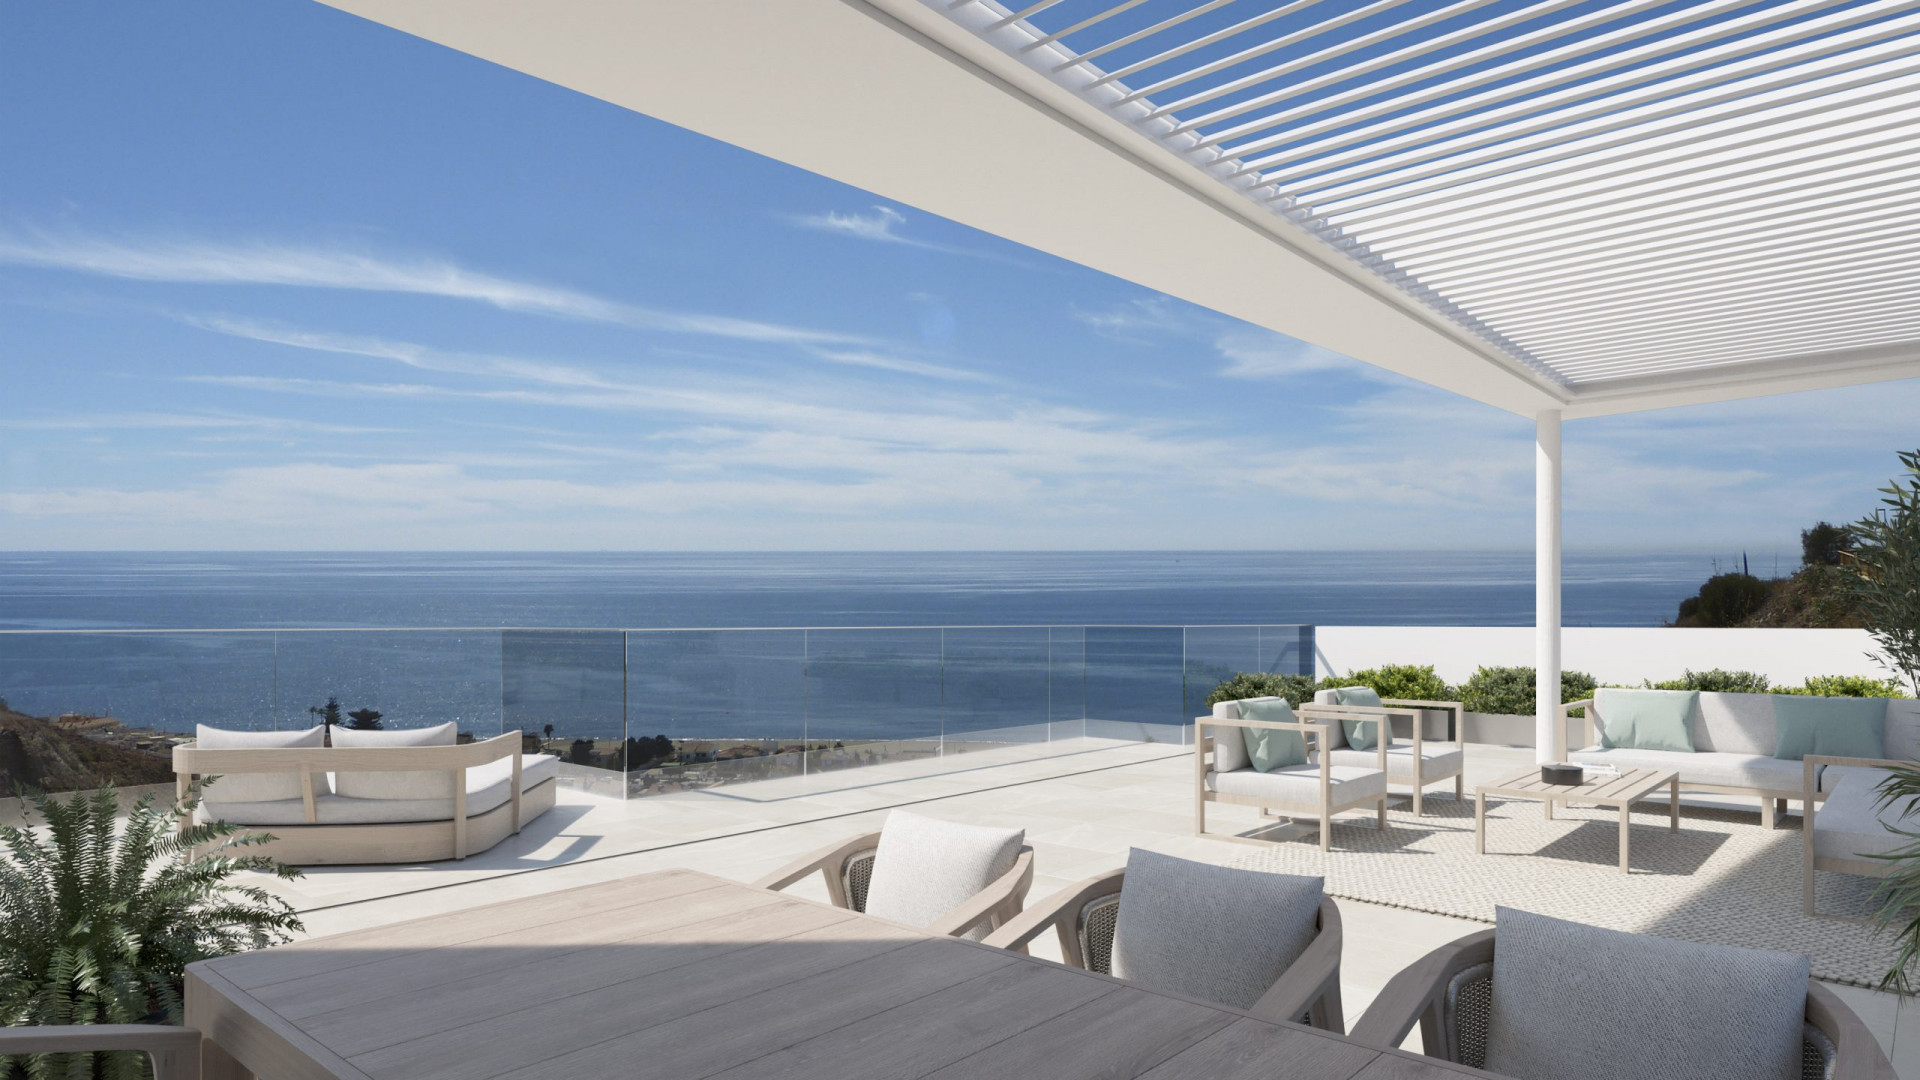 Idilia Mare: Development of 34 modern flats and penthouses with sea views in Rincón de la Victoria. | Image 1